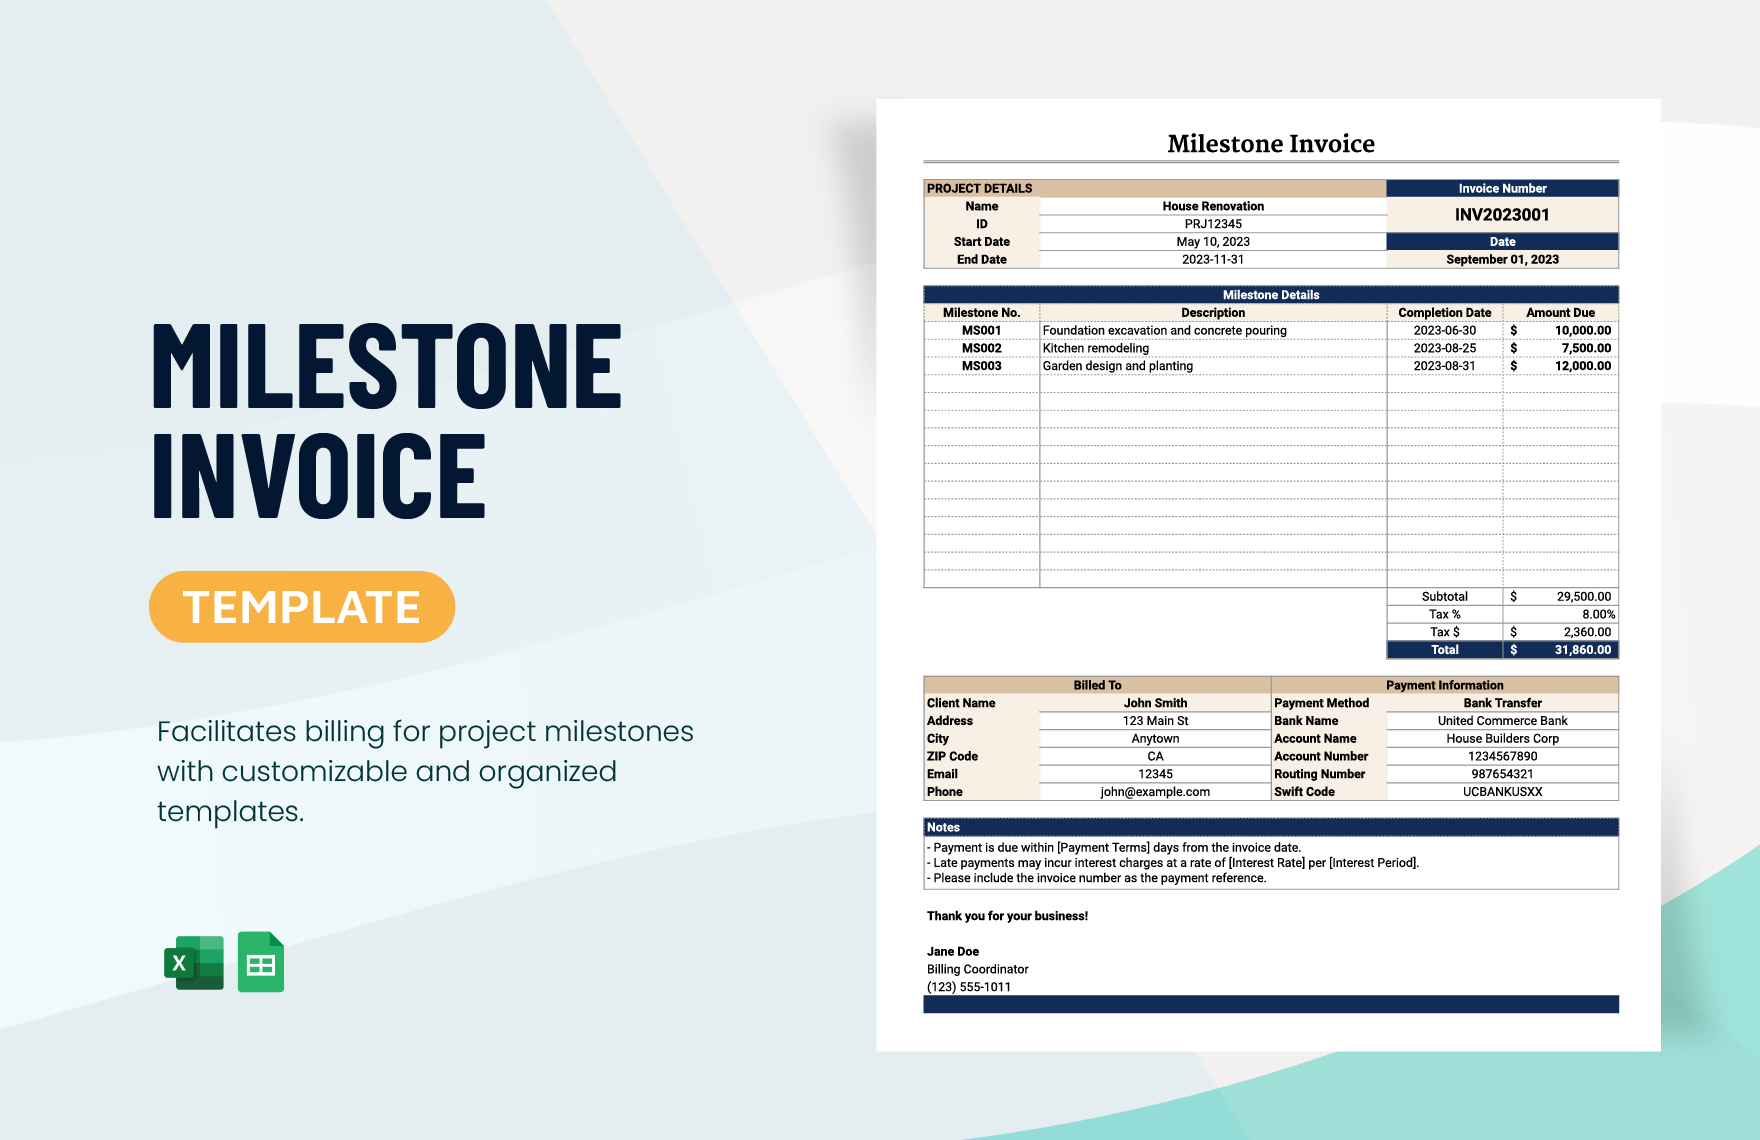 Milestone Invoice Template in Excel, Google Sheets